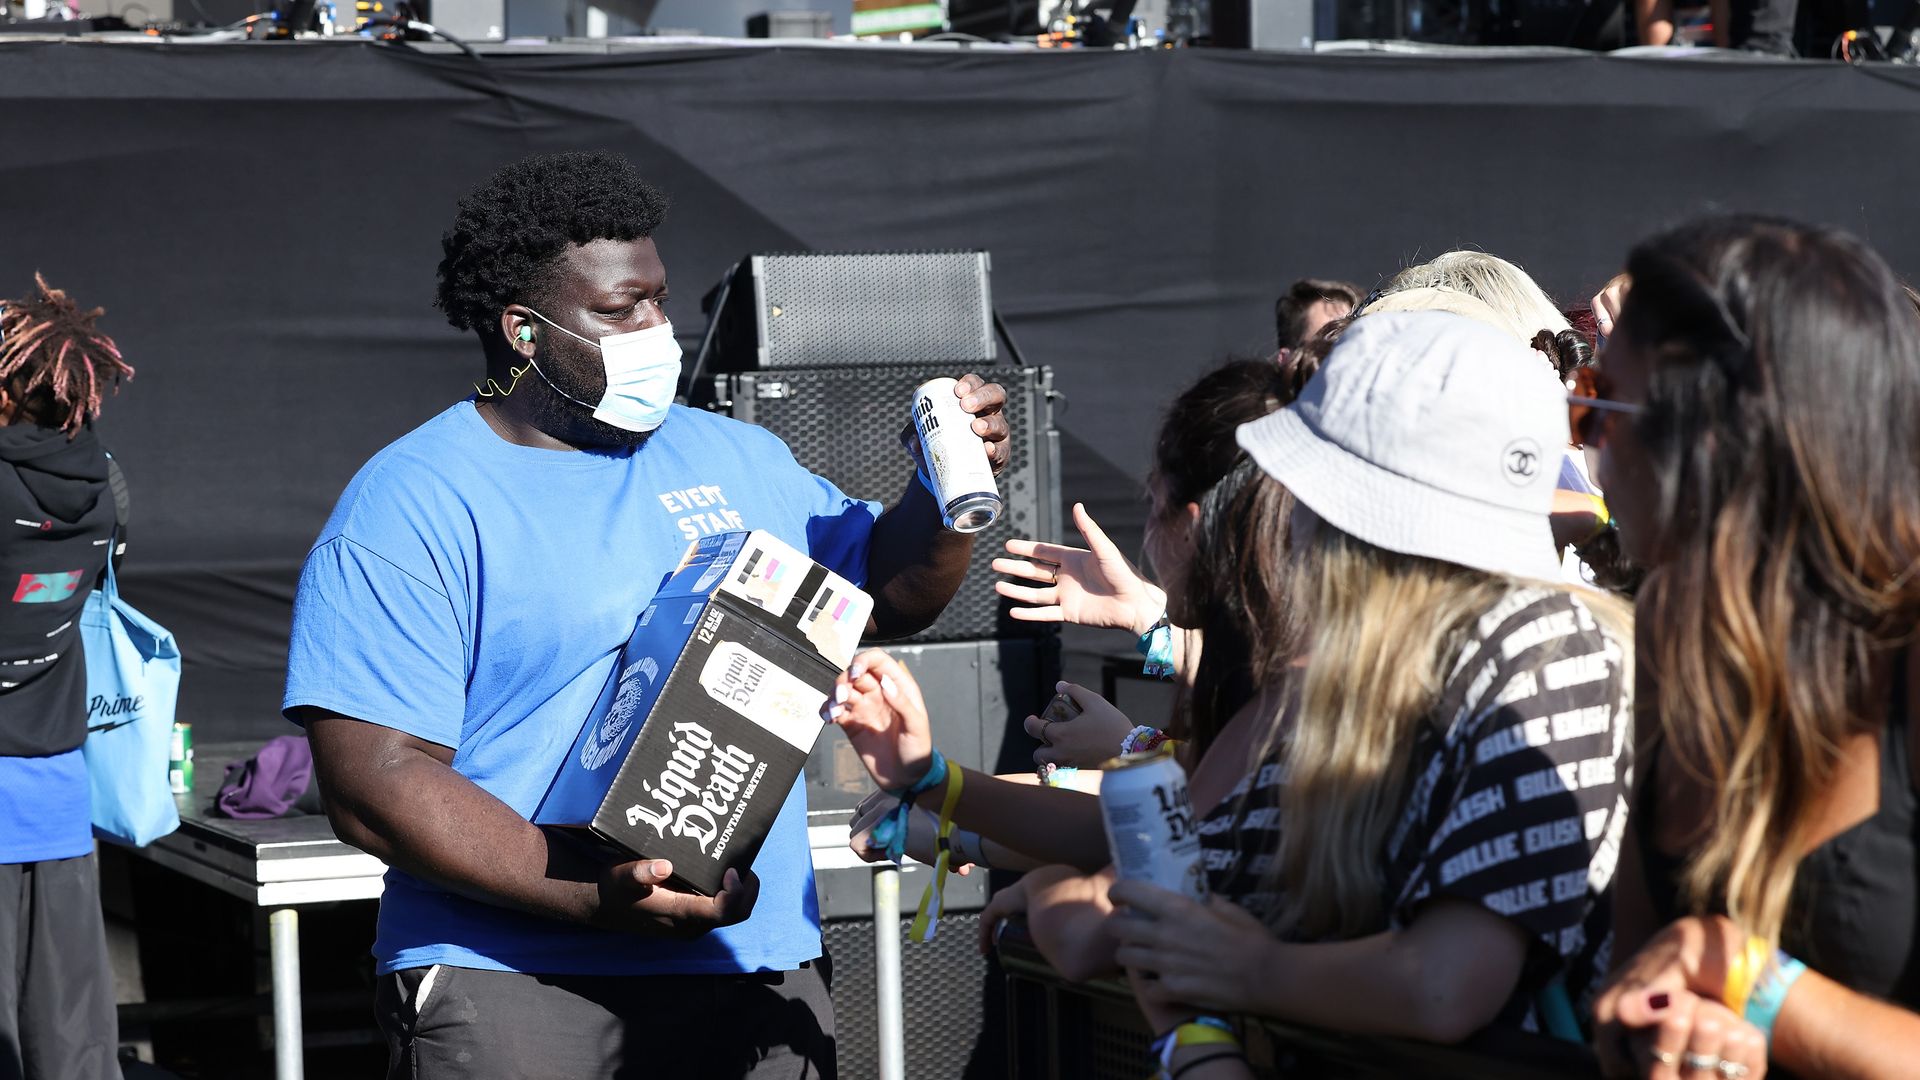 Liquid Death's water beverage being handed out at the Governors Ball Music Festival in New York City.